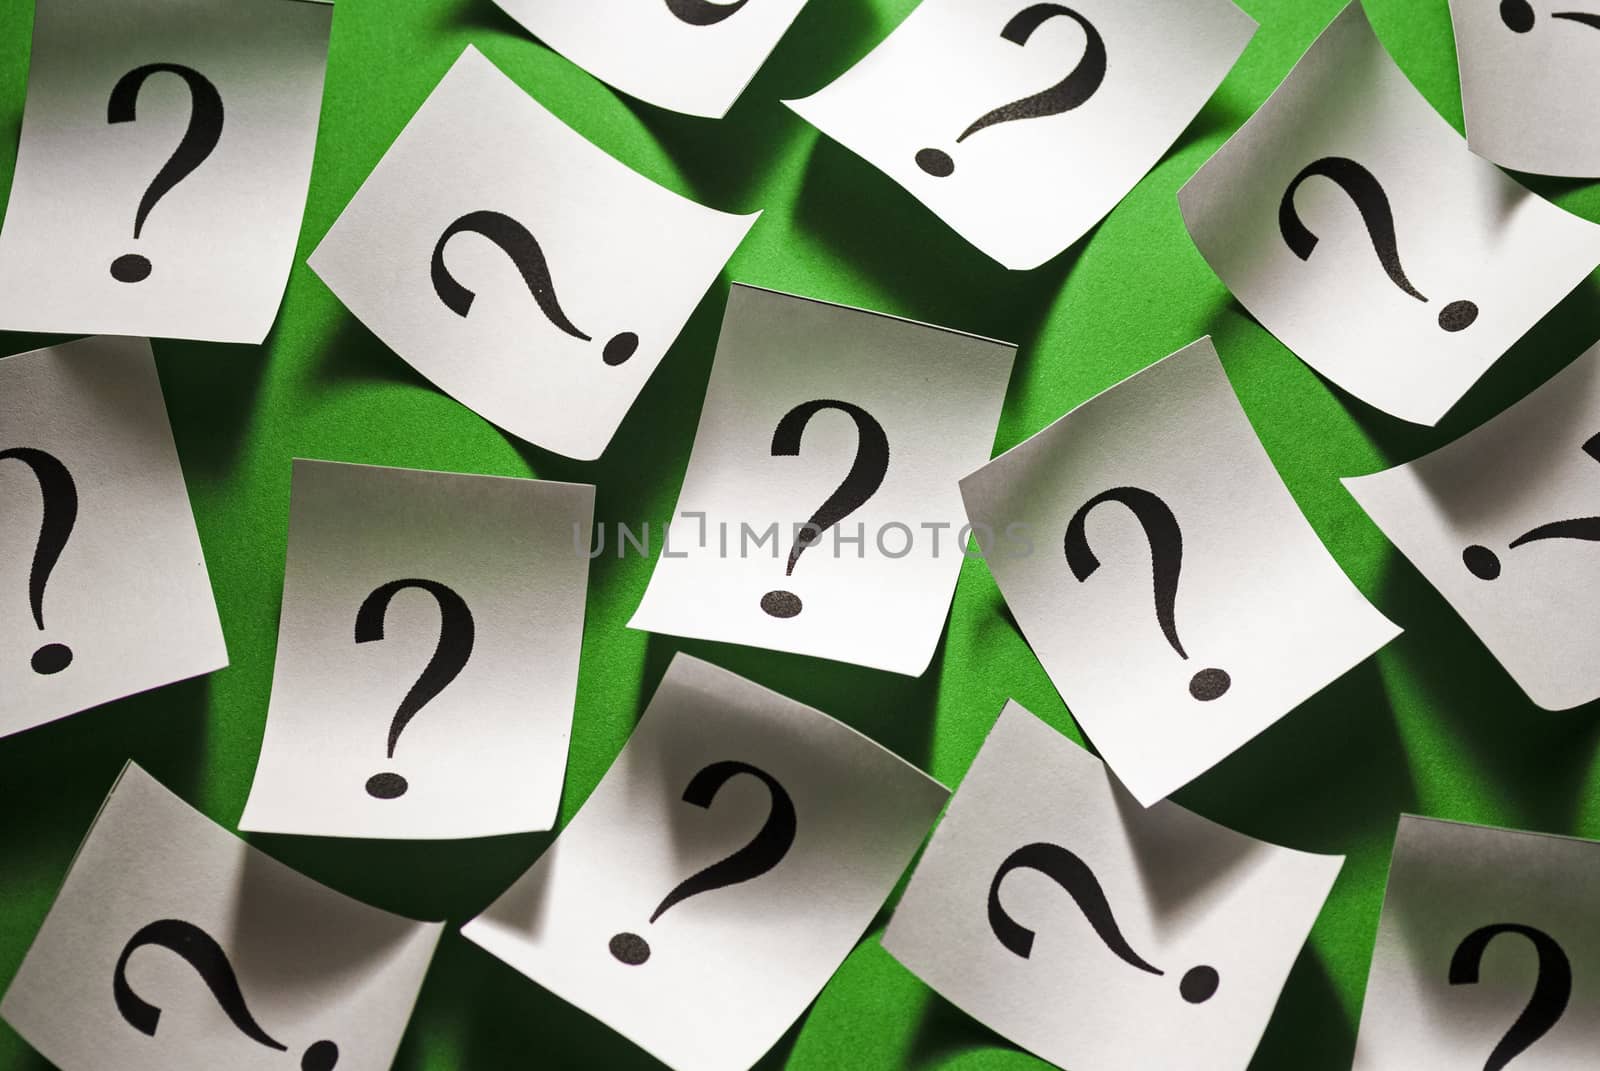 Randomly scattered question marks on white paper over a colorful green background in a conceptual image